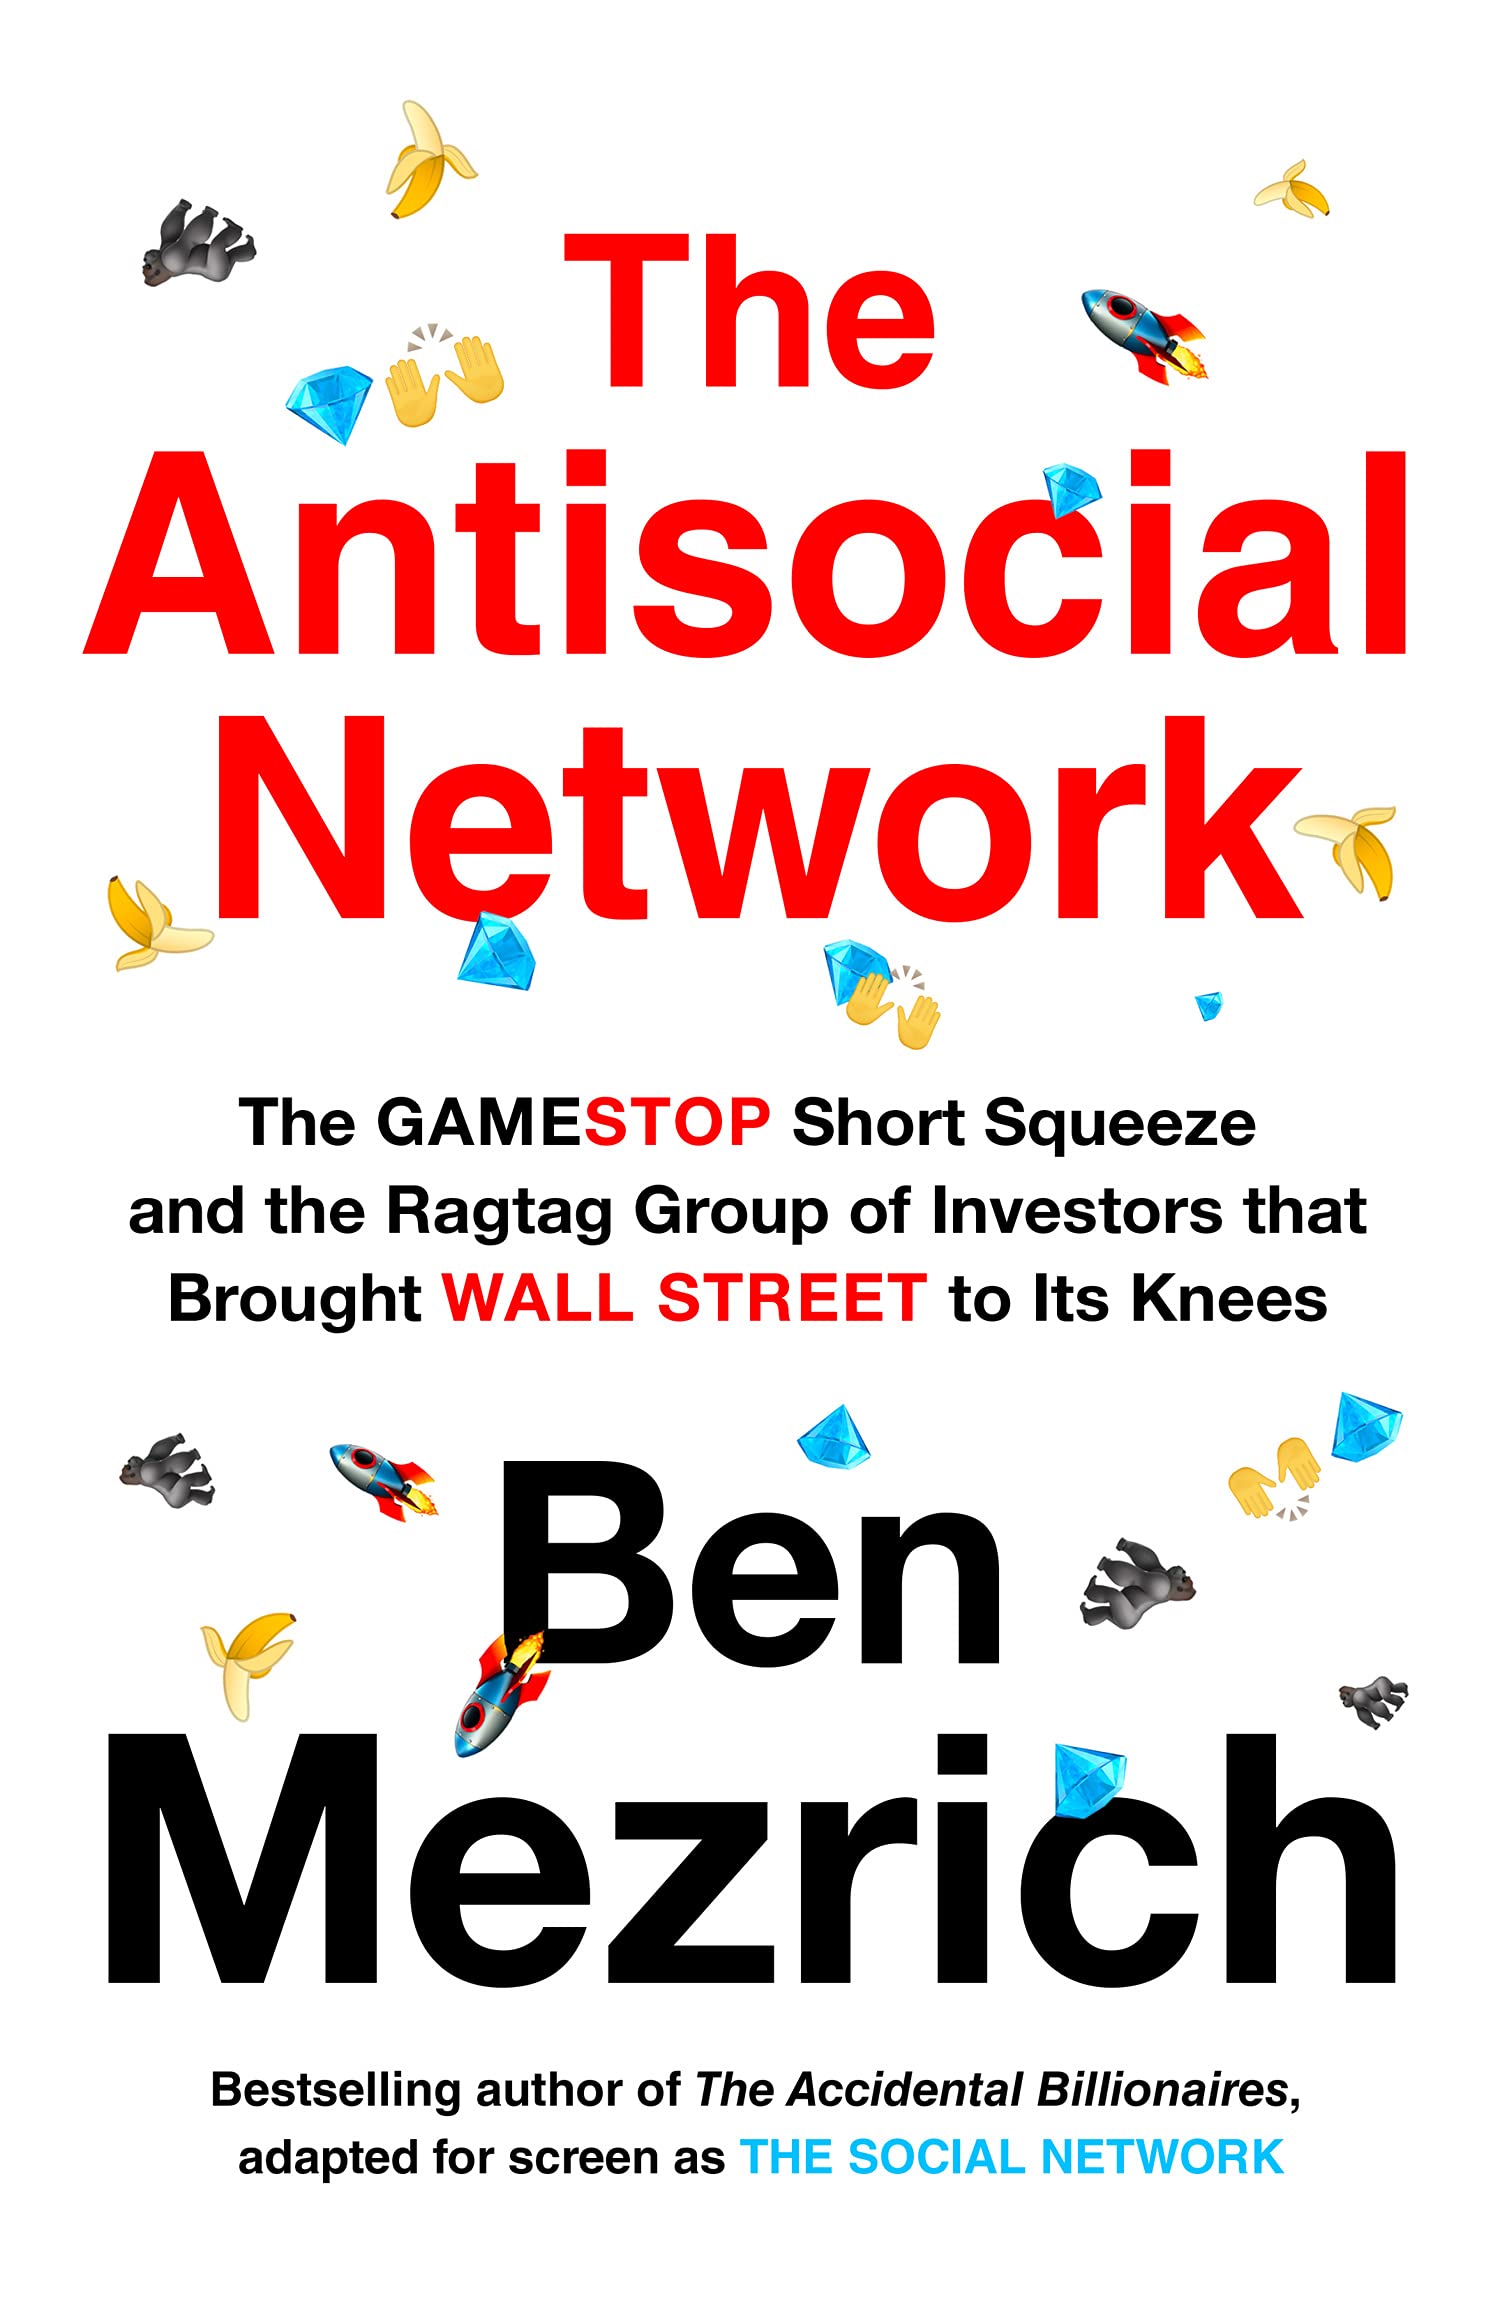 The Antisocial Network by Ben Mezrich